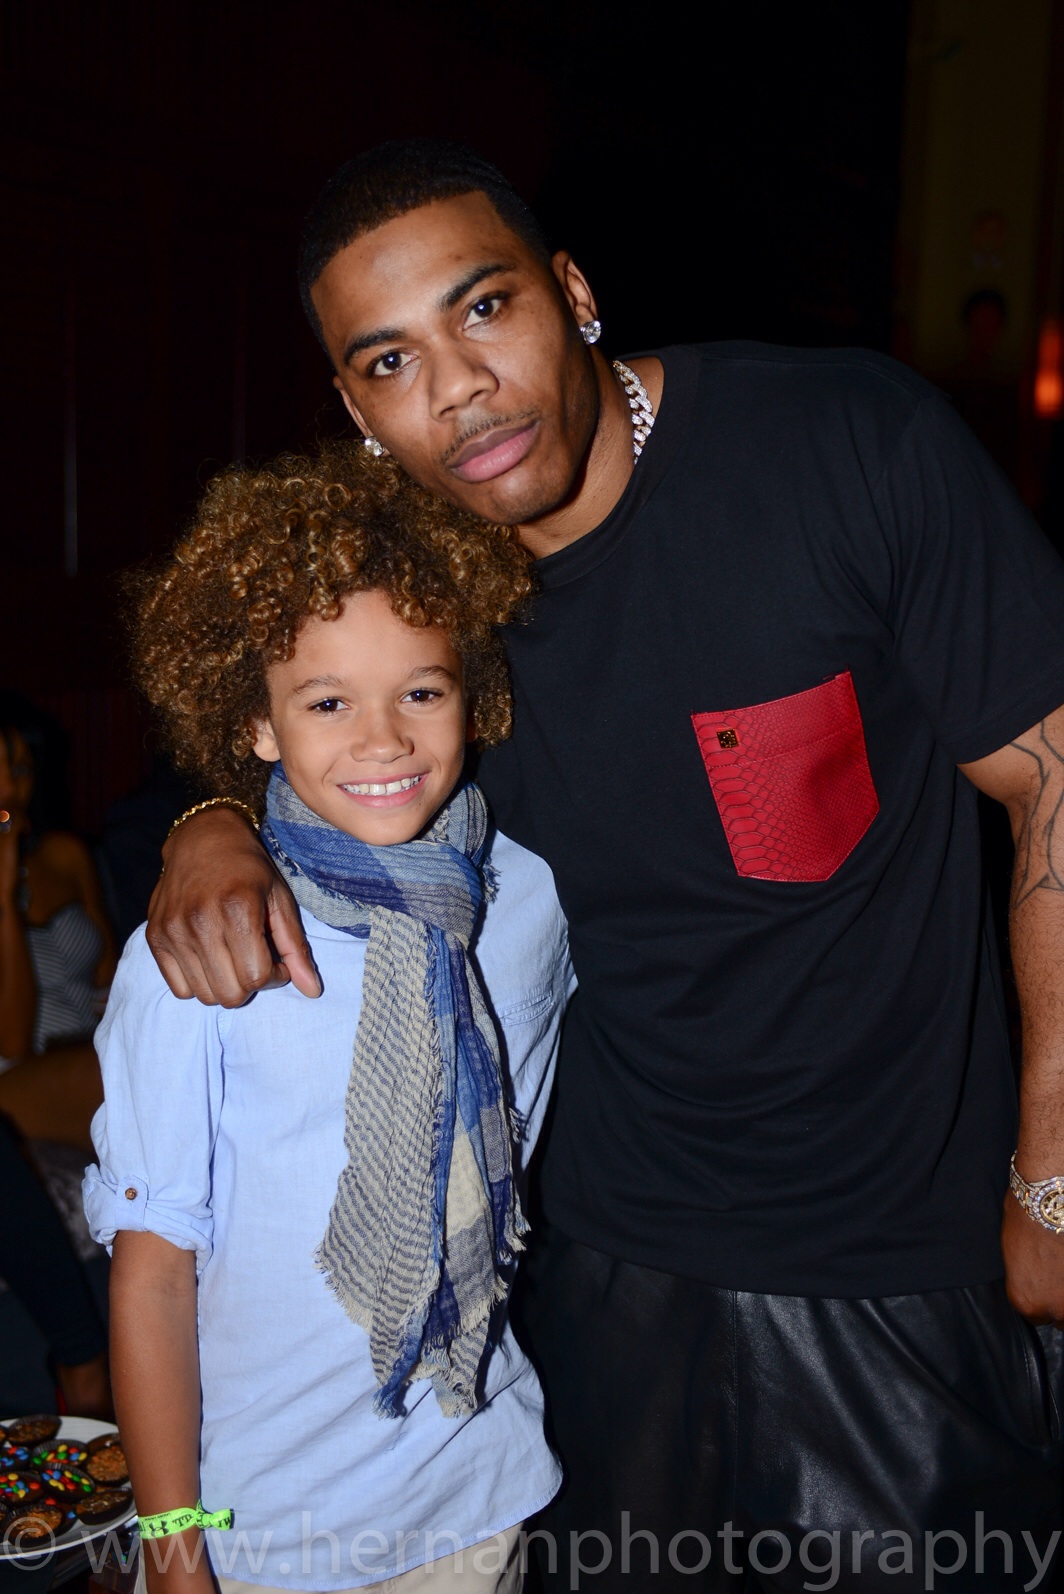 Armani and his cast mate Nelly from Real Husbands of Hollywood